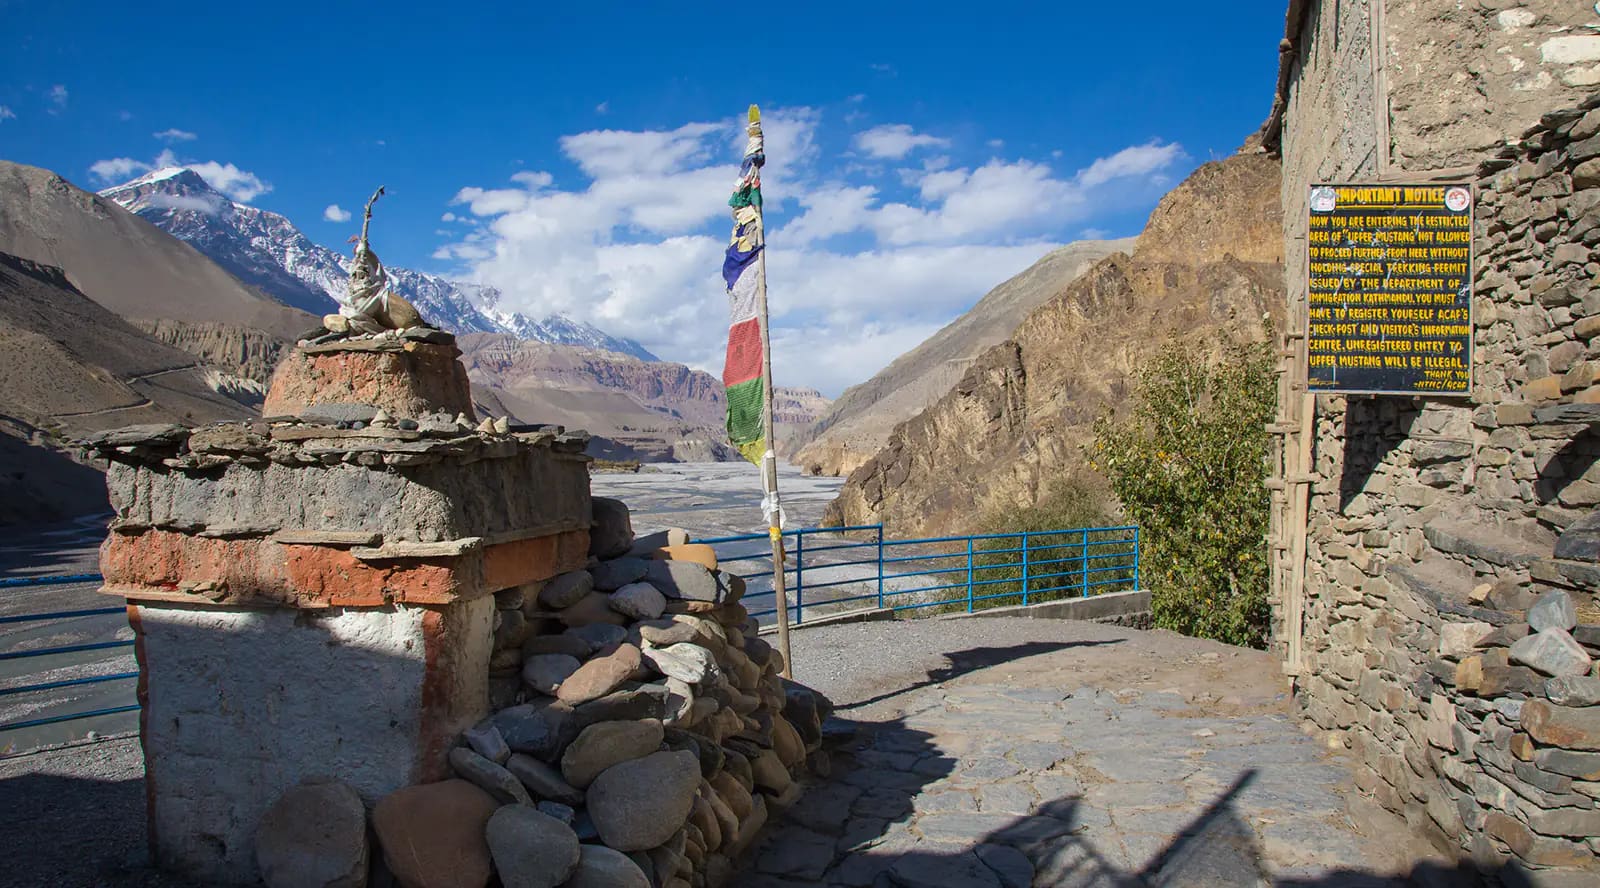 Important Notice - Now you are entering the restricted area of “Upper Mustang”